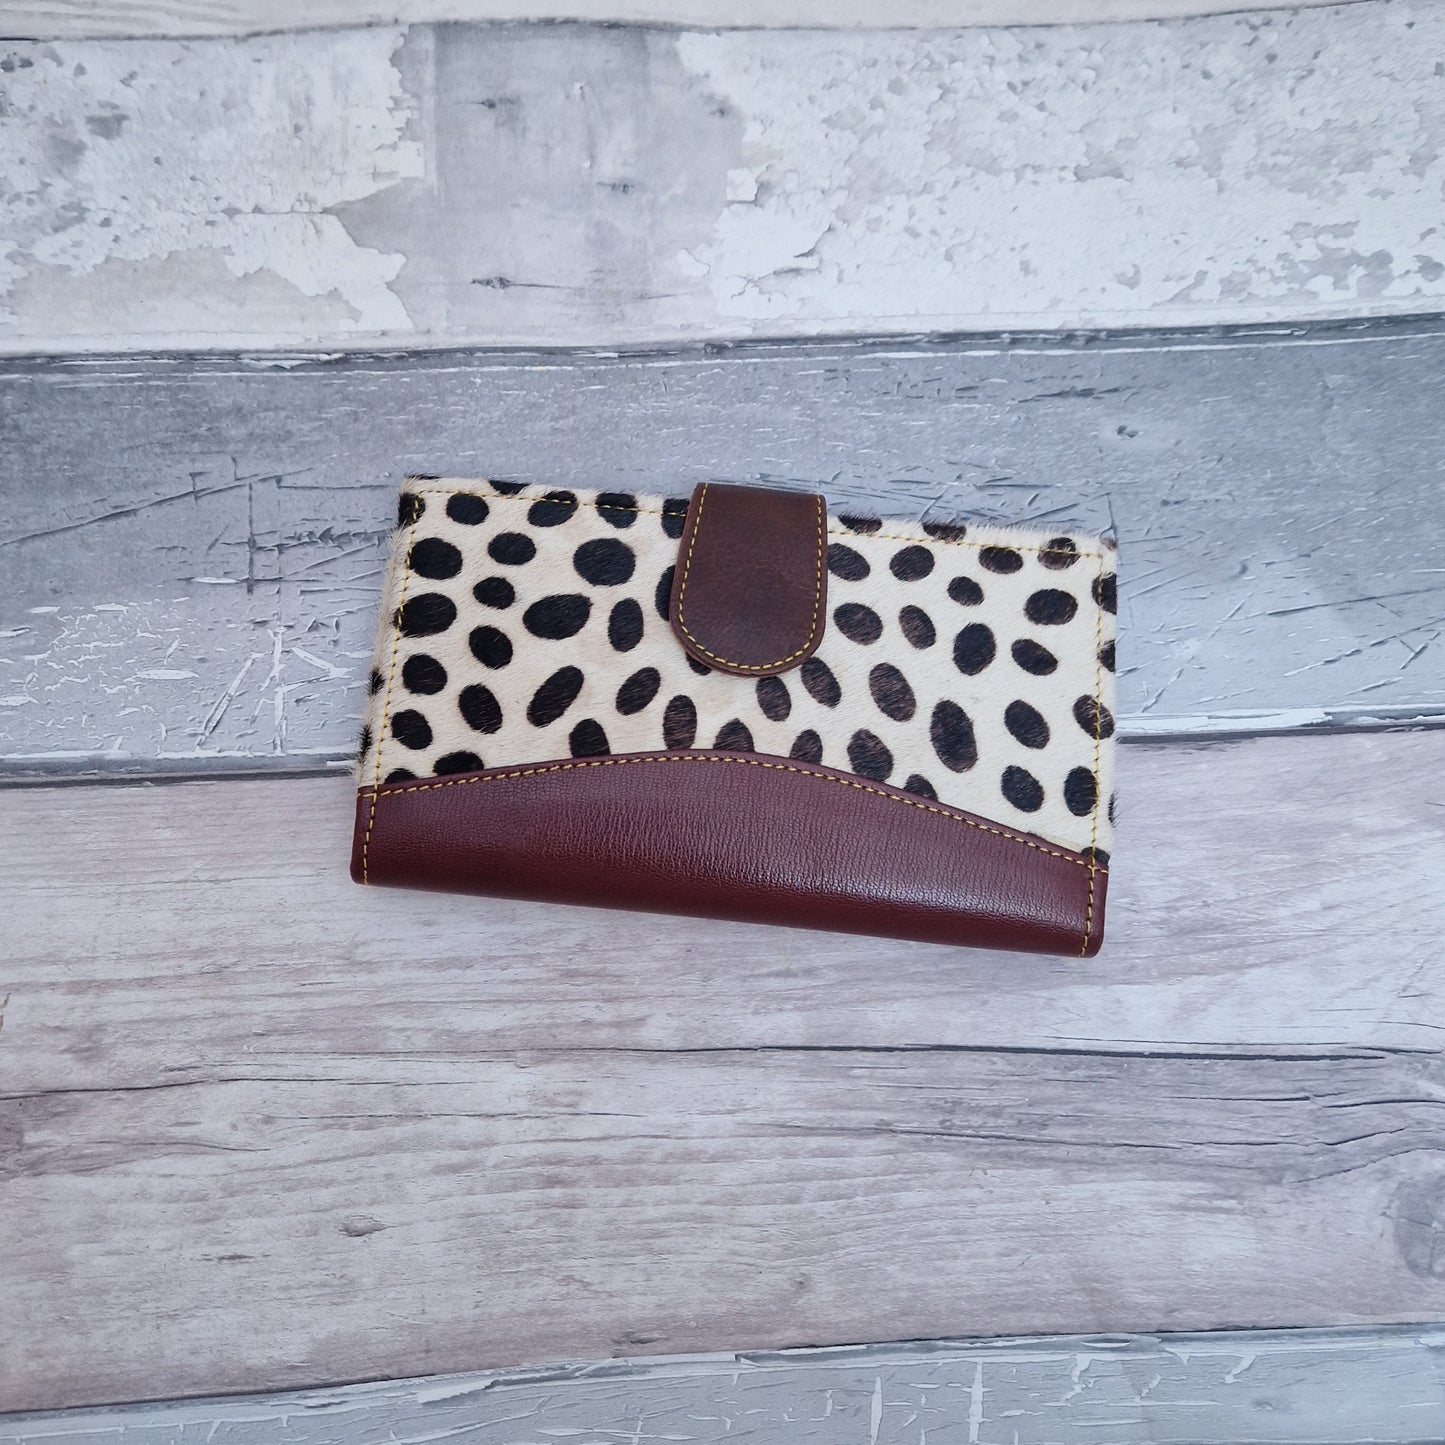 All leather purse with a spot print textured finish.